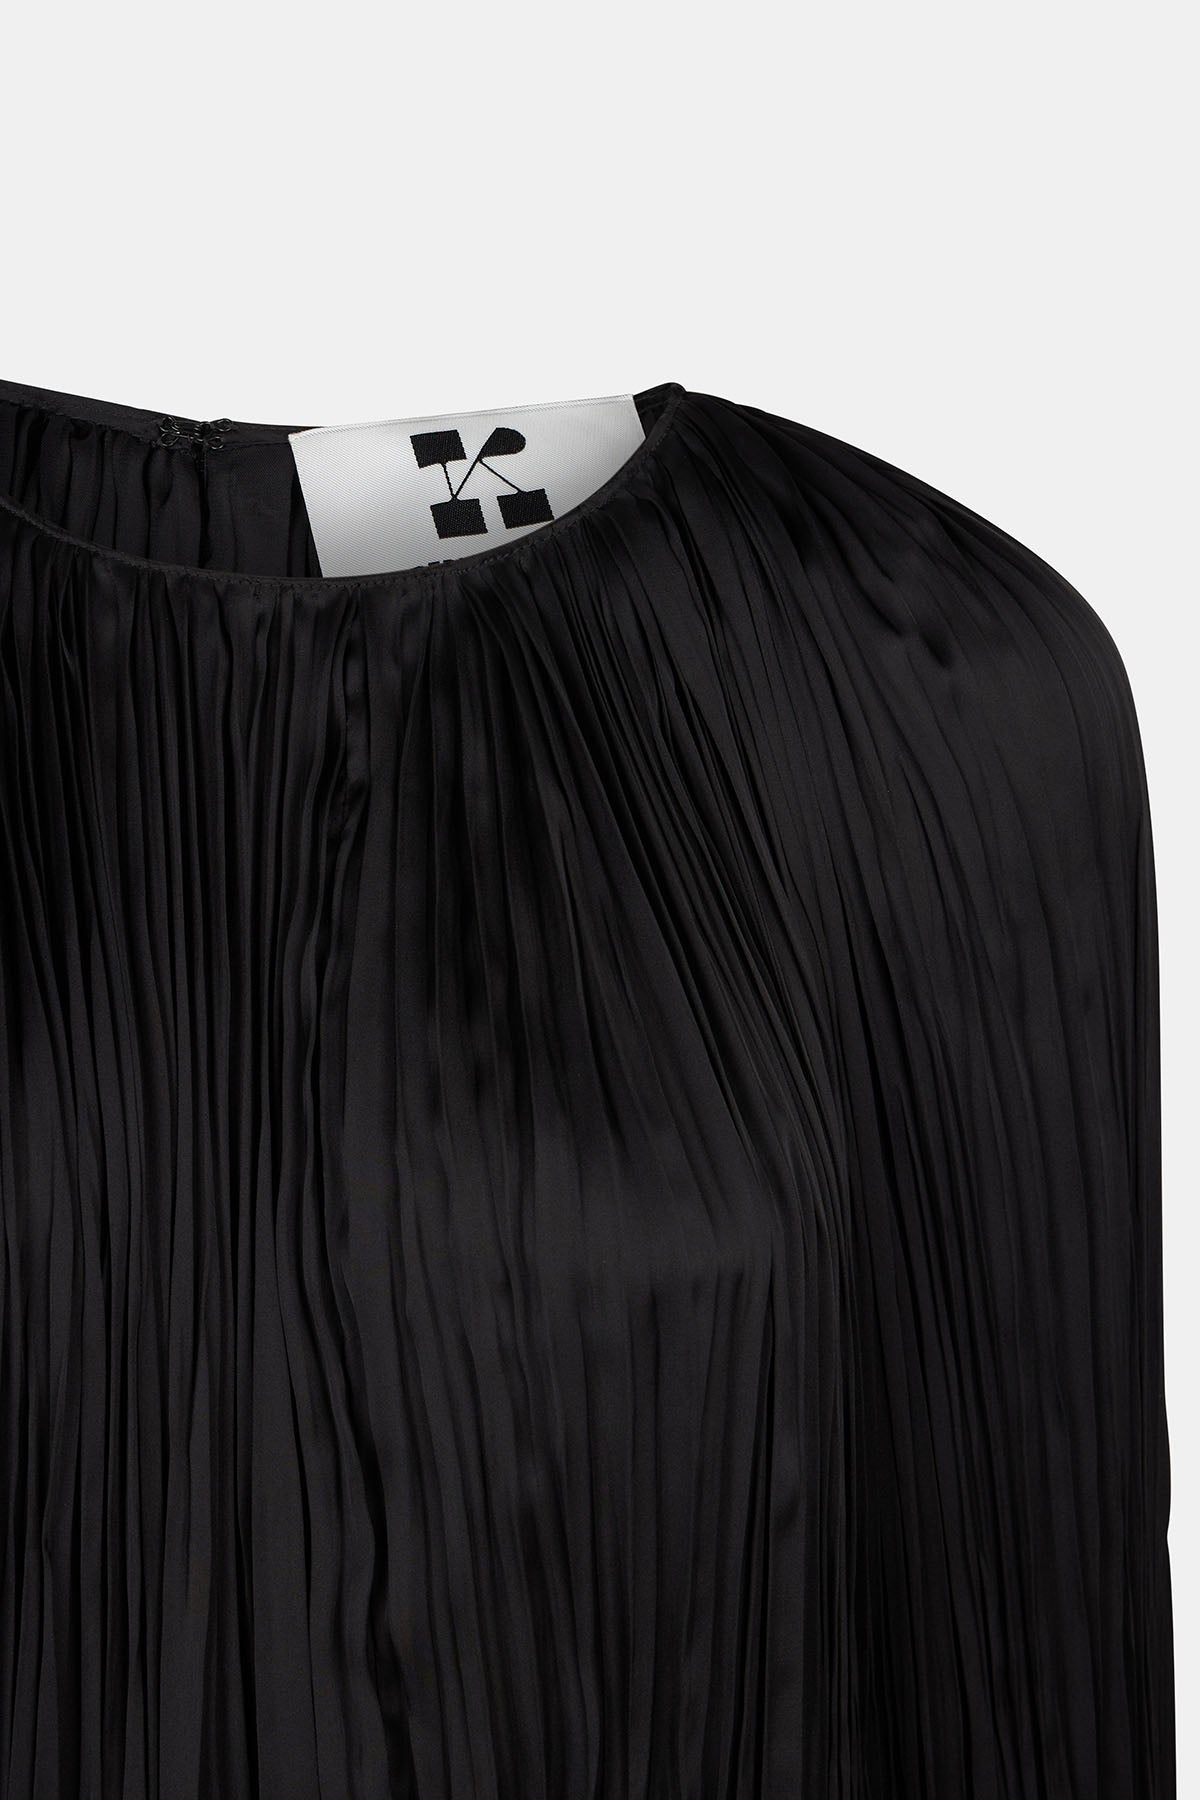 The Short Pleated Dress Cape